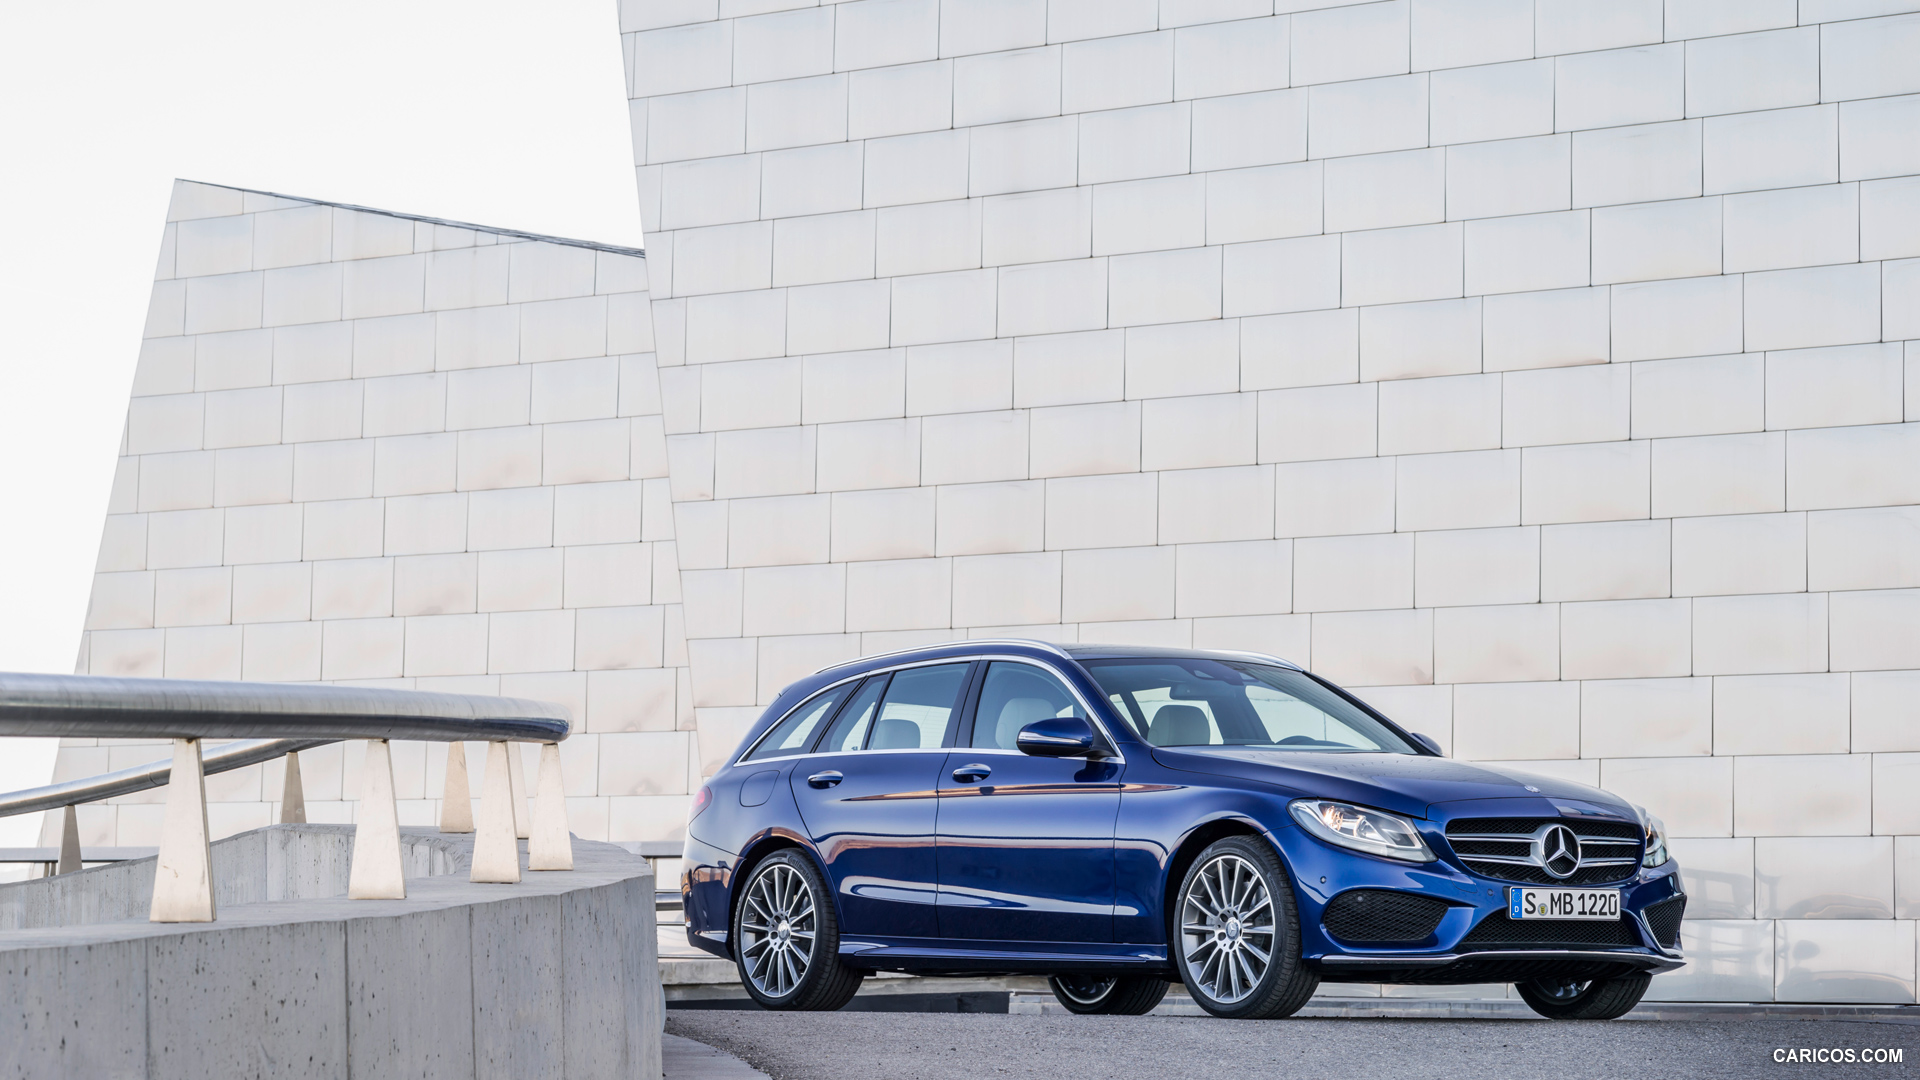 2015 Mercedes-Benz C-Class Estate C250 BlueTEC 4MATIC (AMG sports package) - Front, #62 of 173